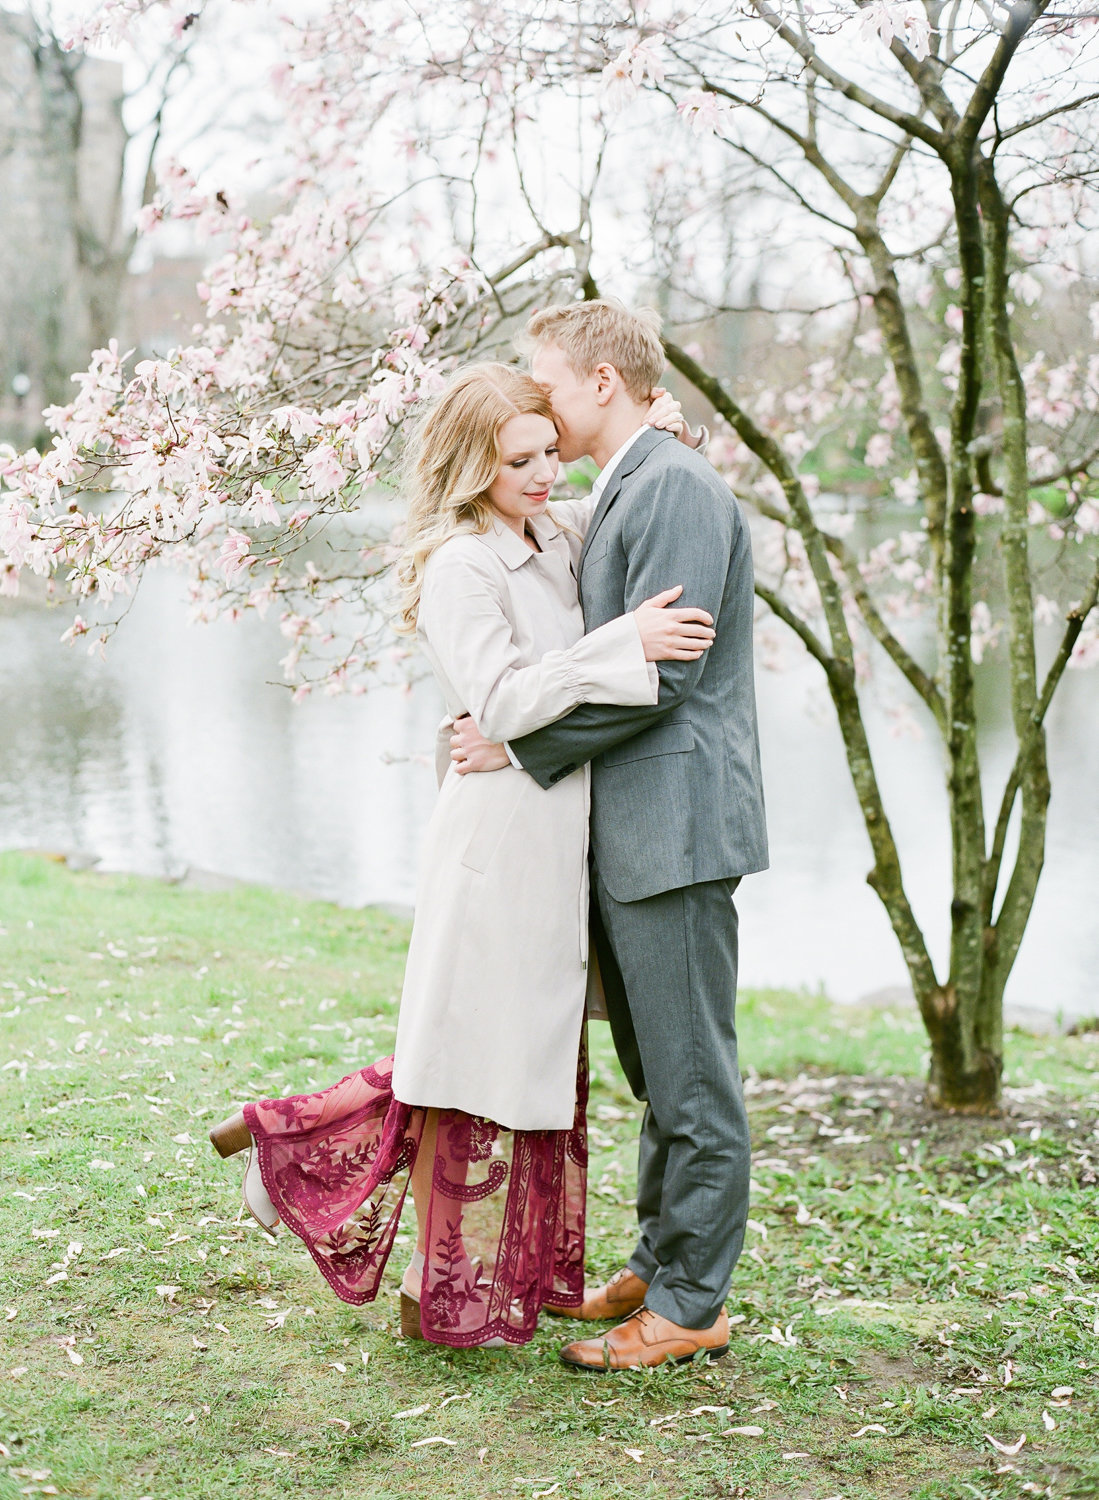 Jacqueline Anne Photography - Amanda and Brent-64